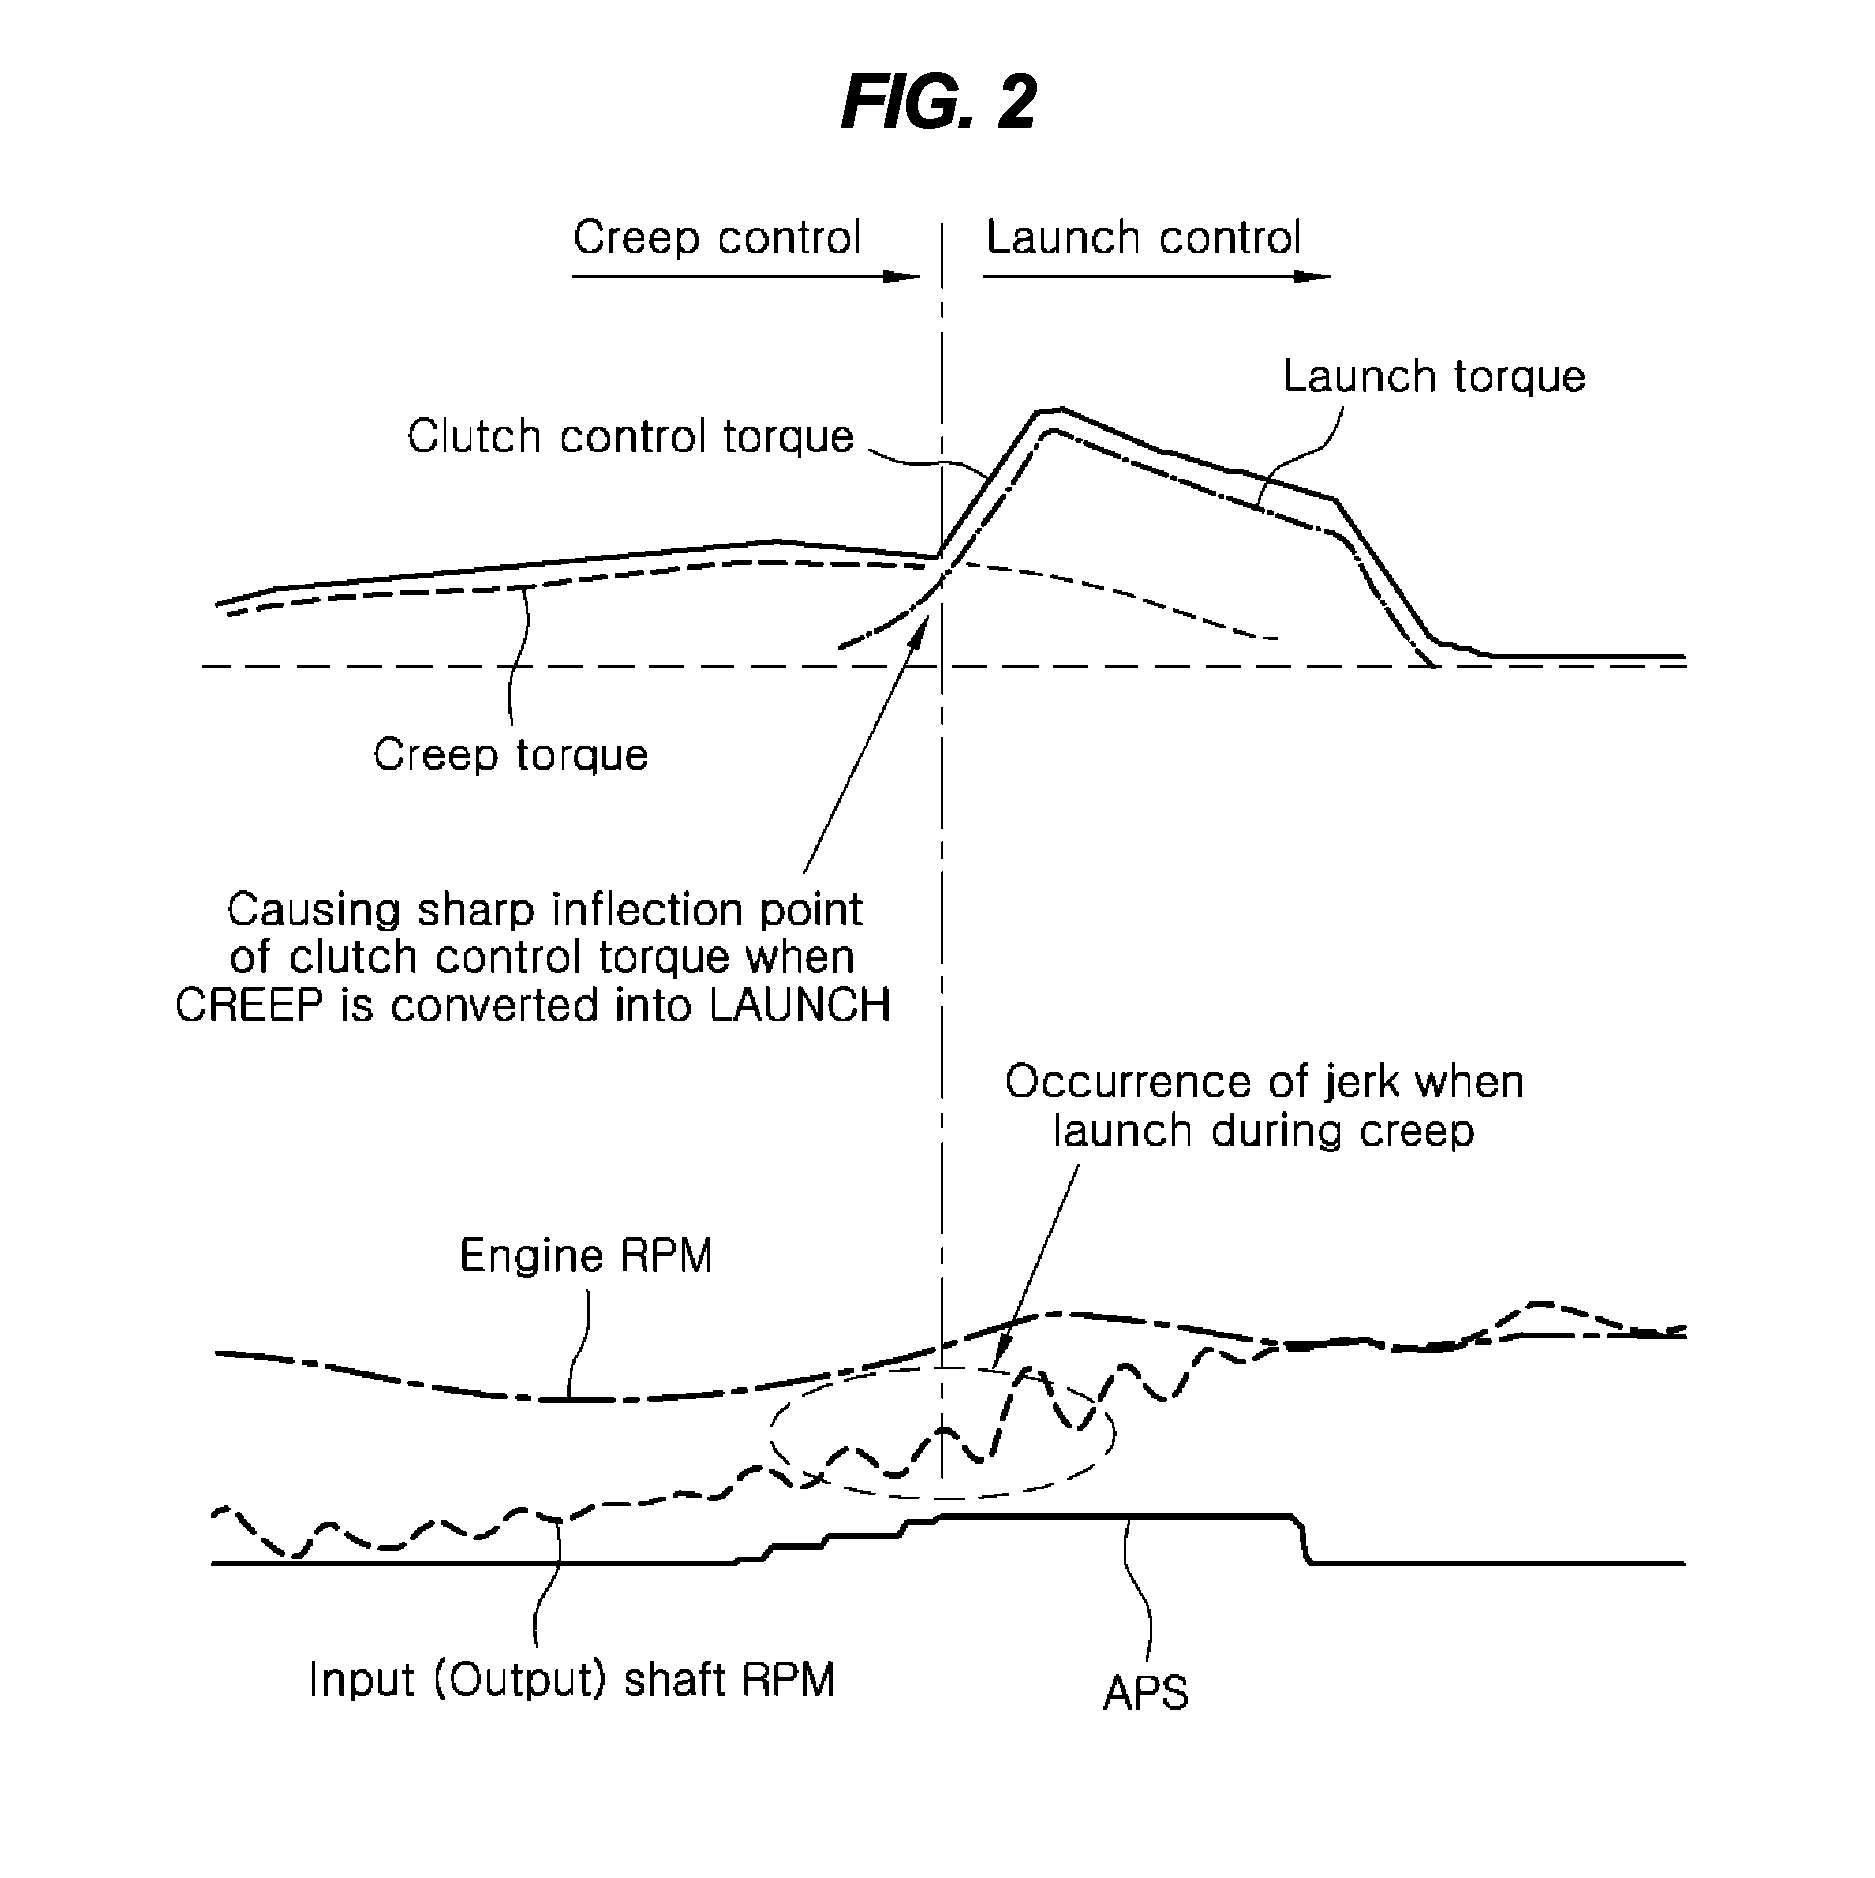 Method of controlling clutch of vehicle